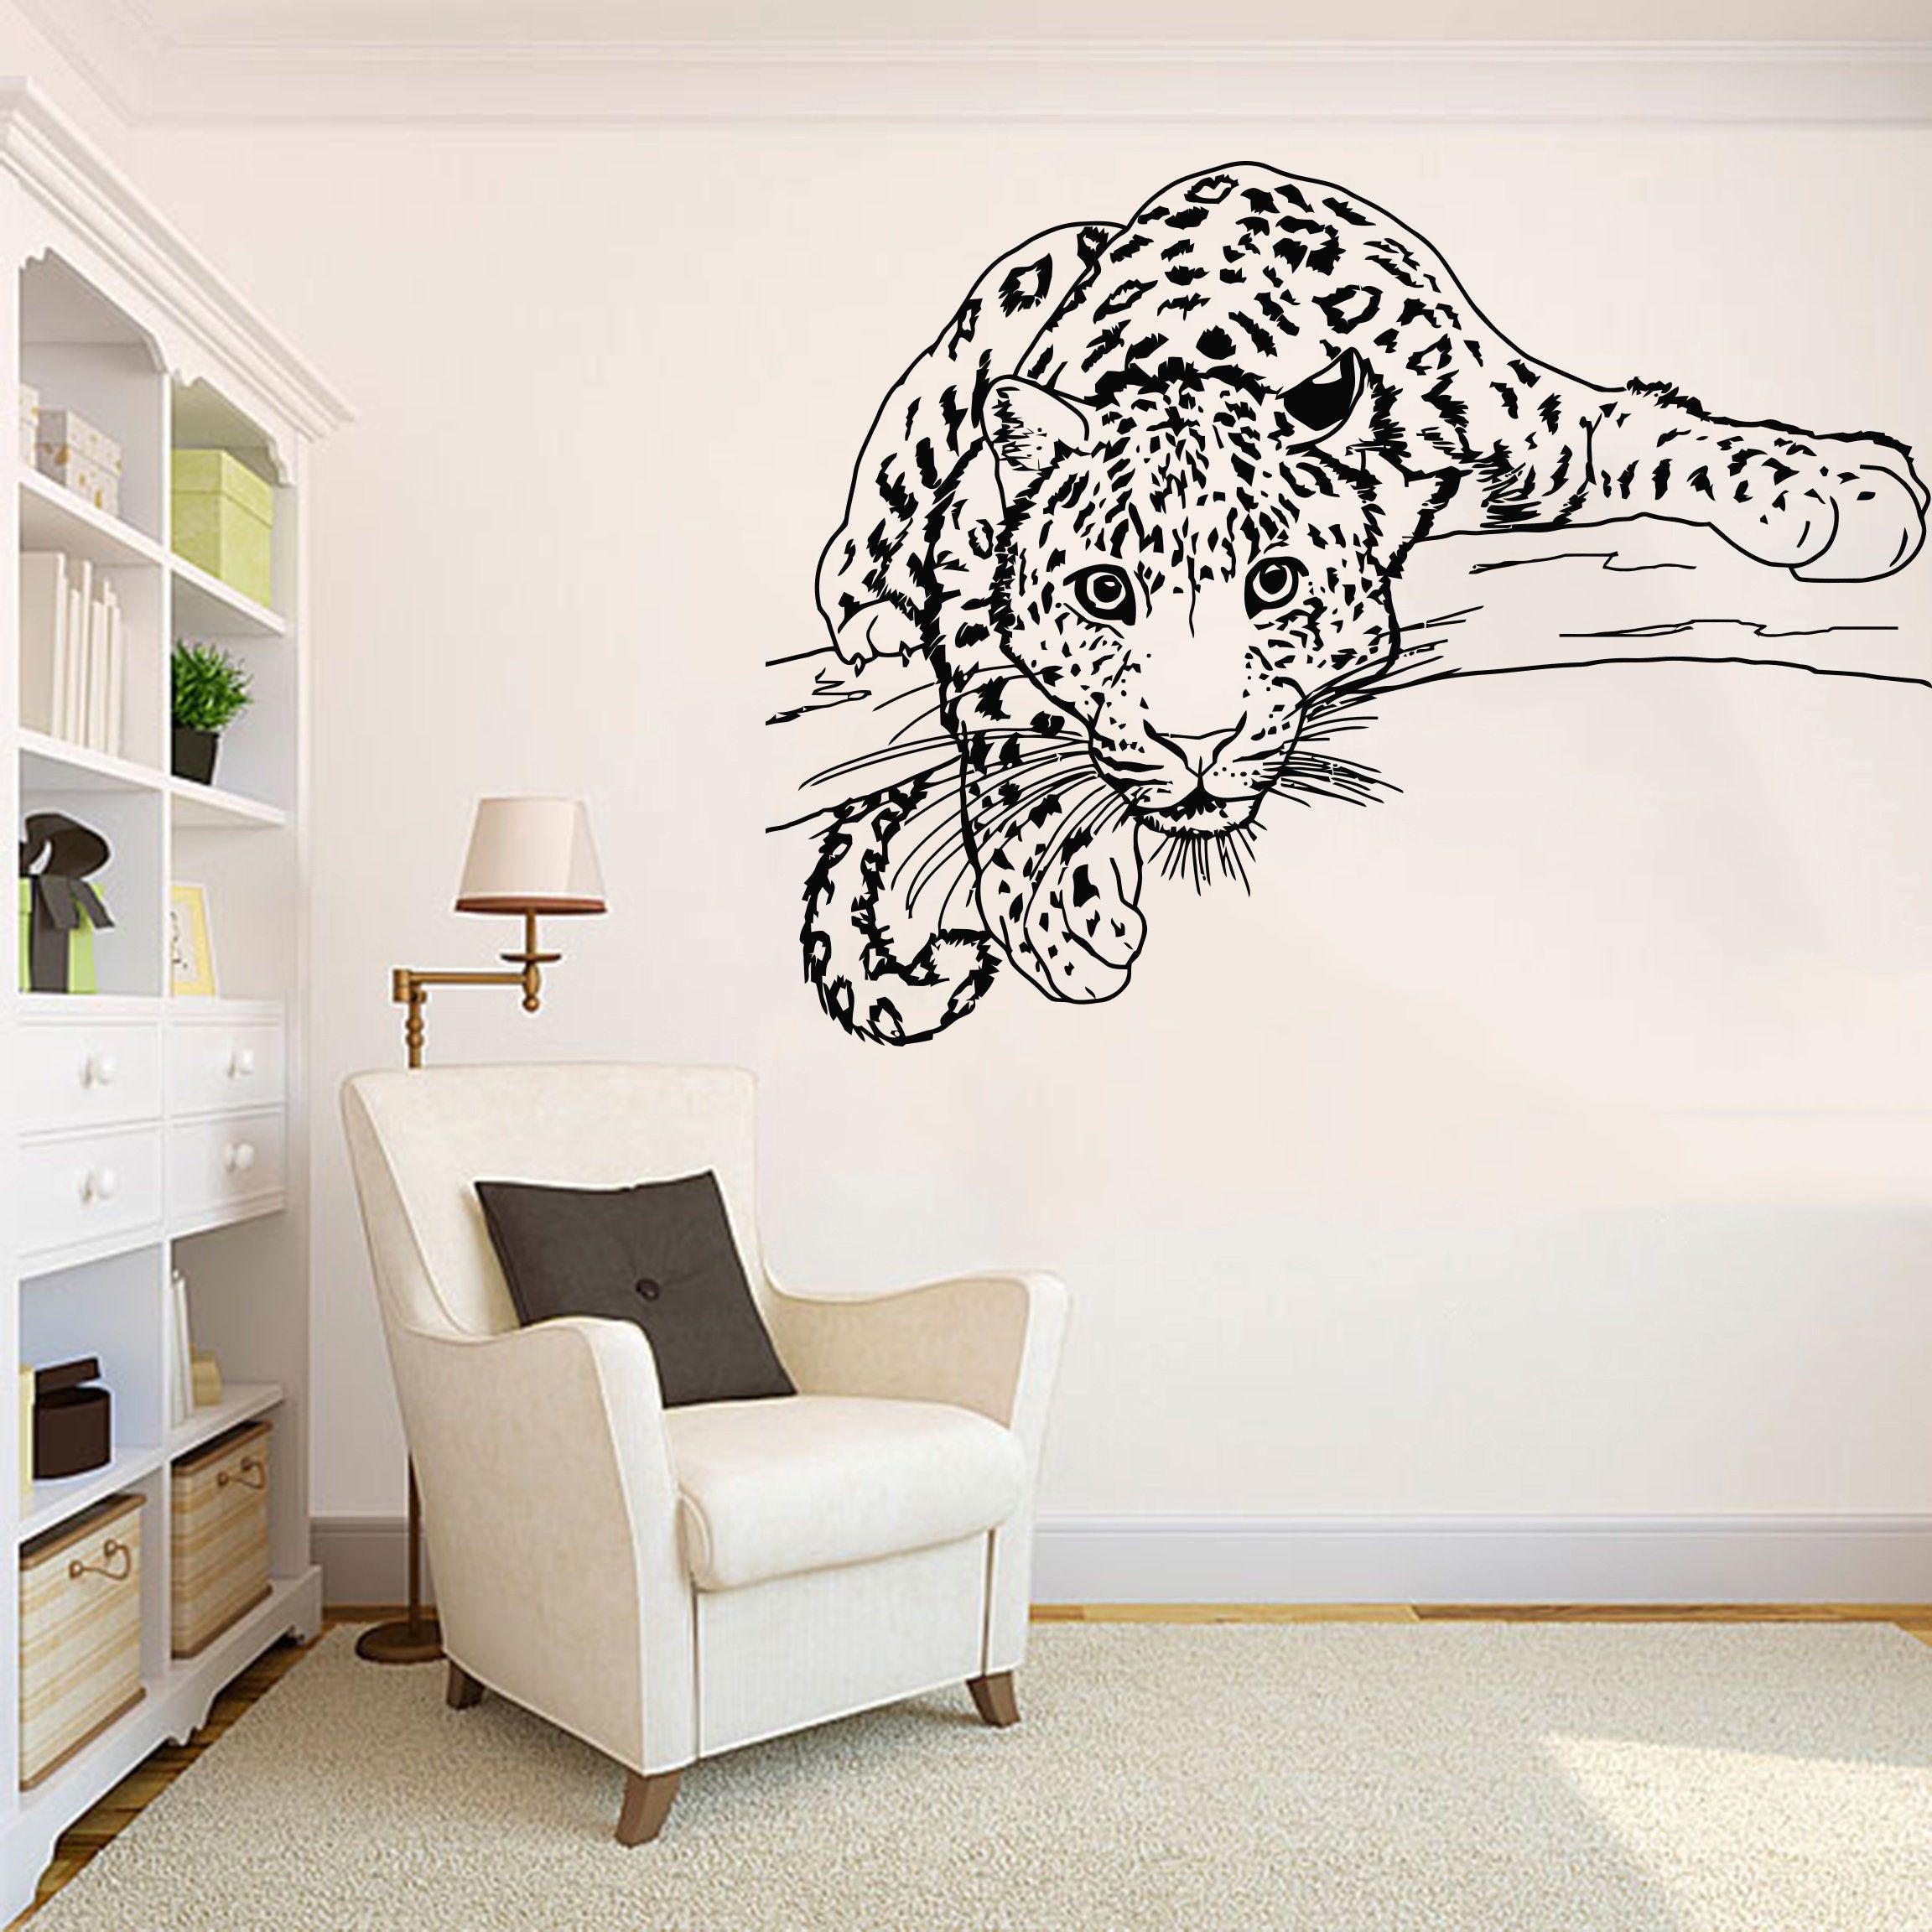 Pin On Wall Decals For Cheetah Wall Art (View 14 of 15)